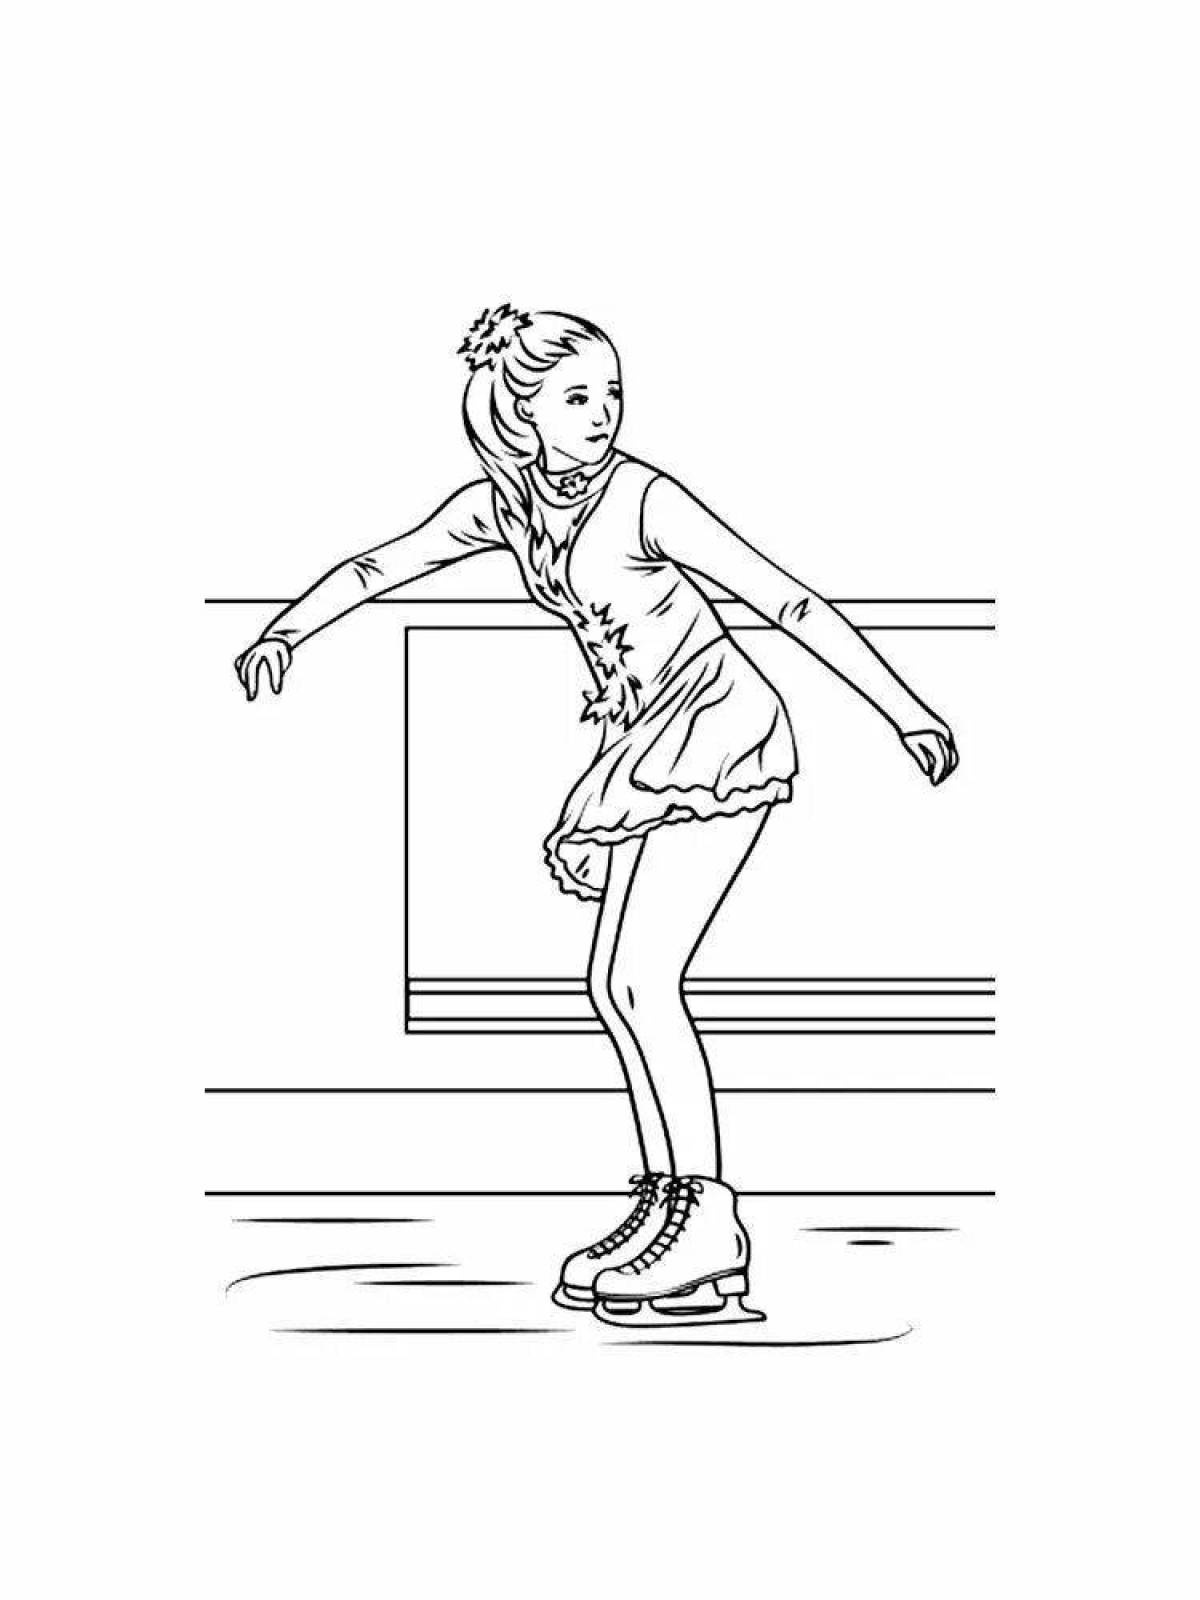 Amazing figure skater coloring book for kids